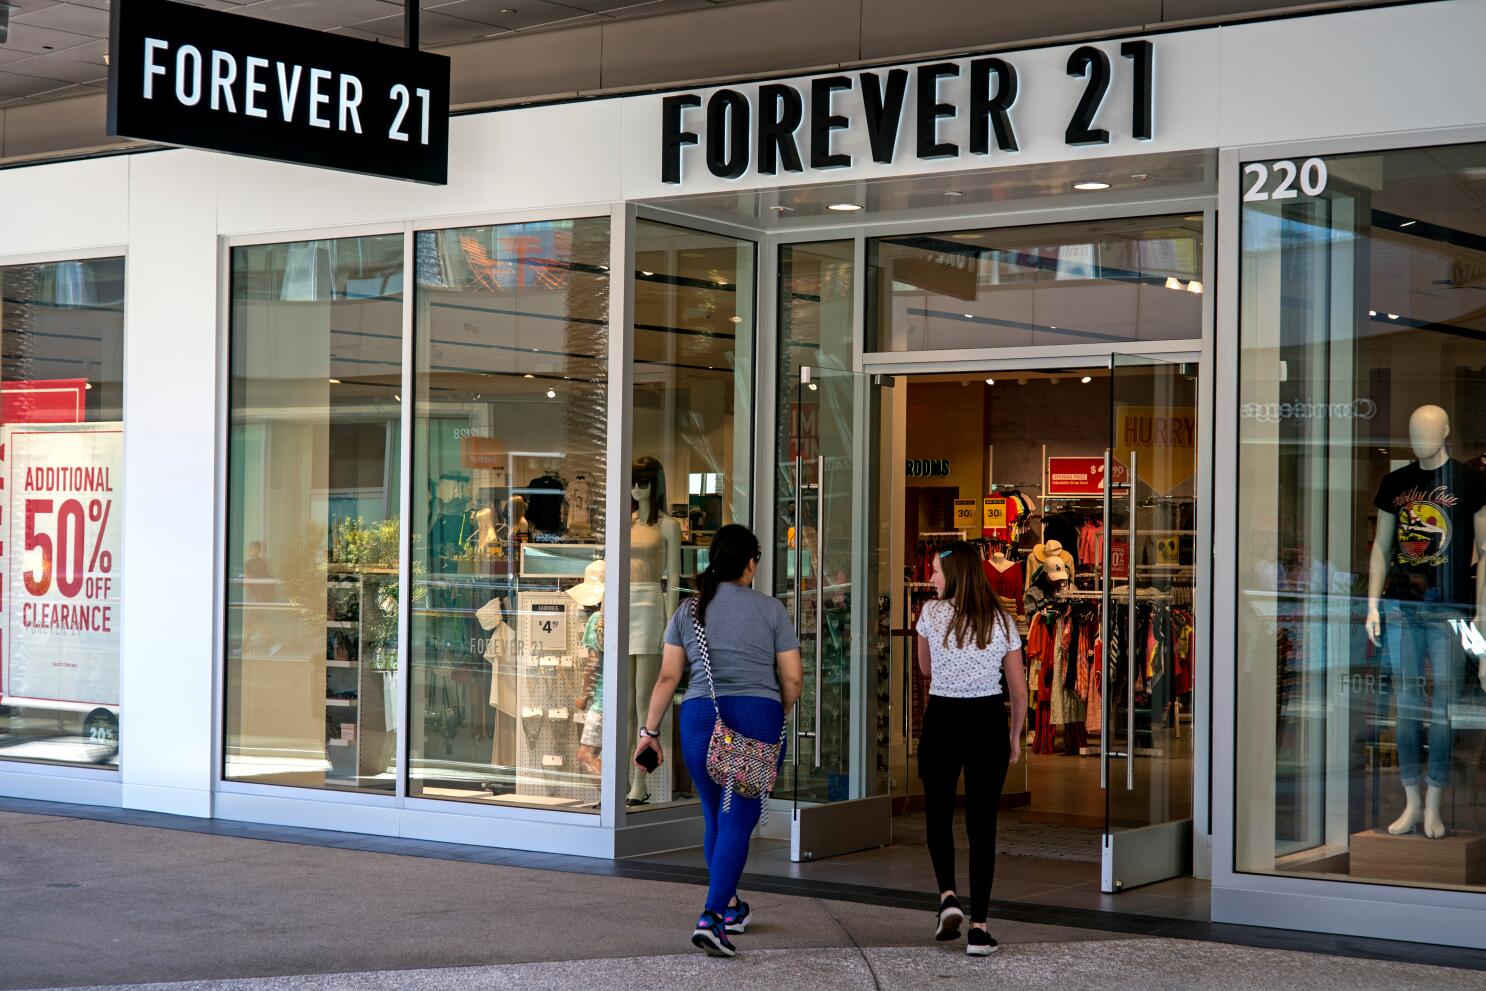 Forever 21's bankruptcy signals a shift in how young shoppers view